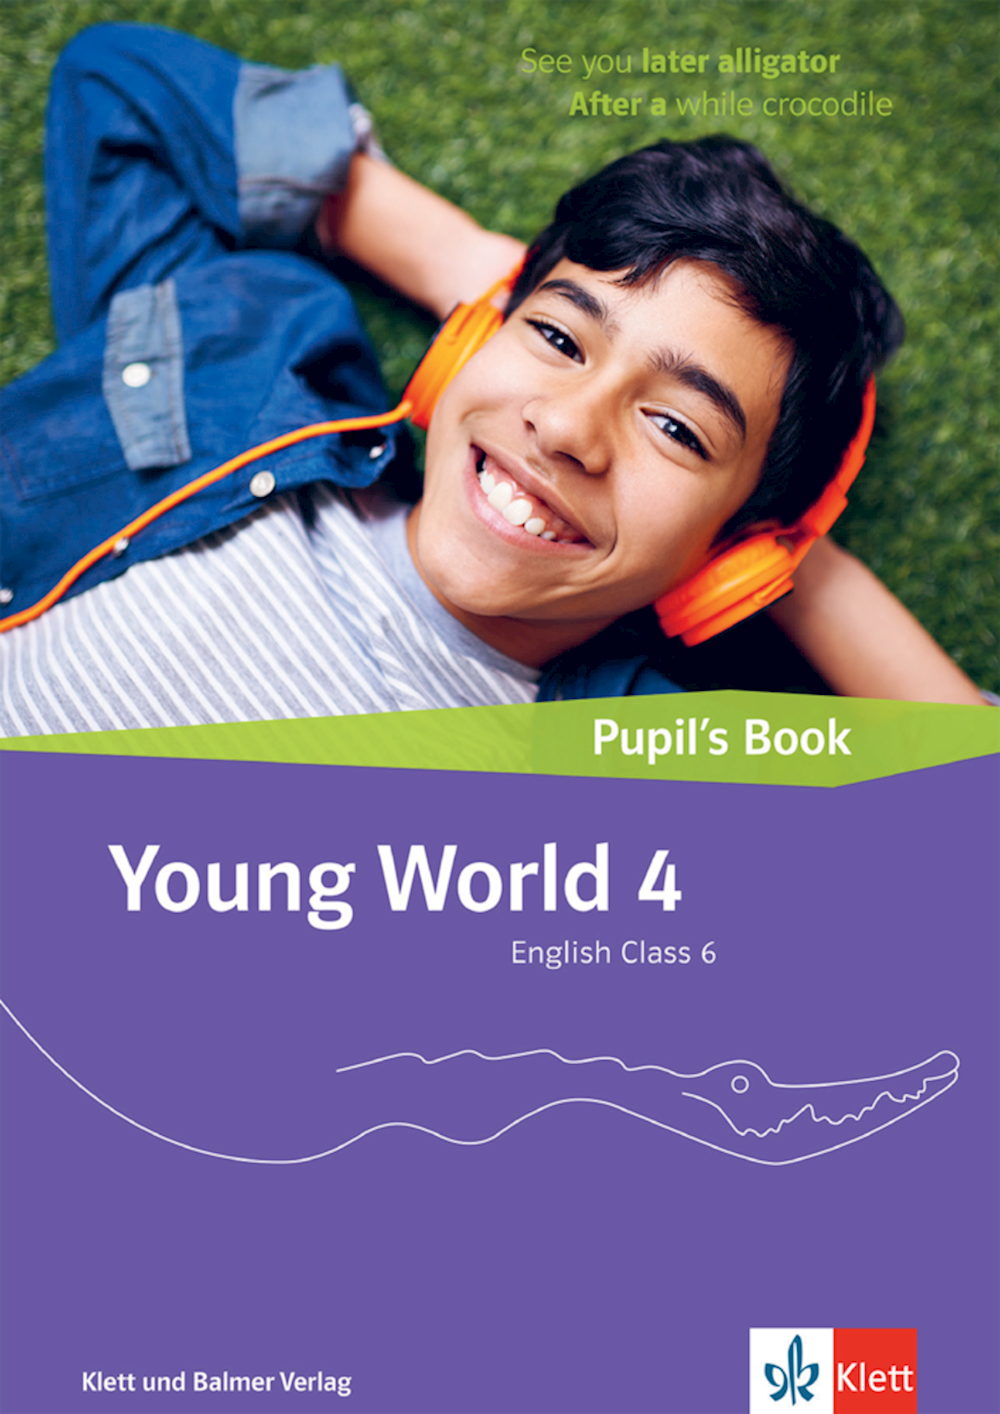 Young World 4 Pupil's Book